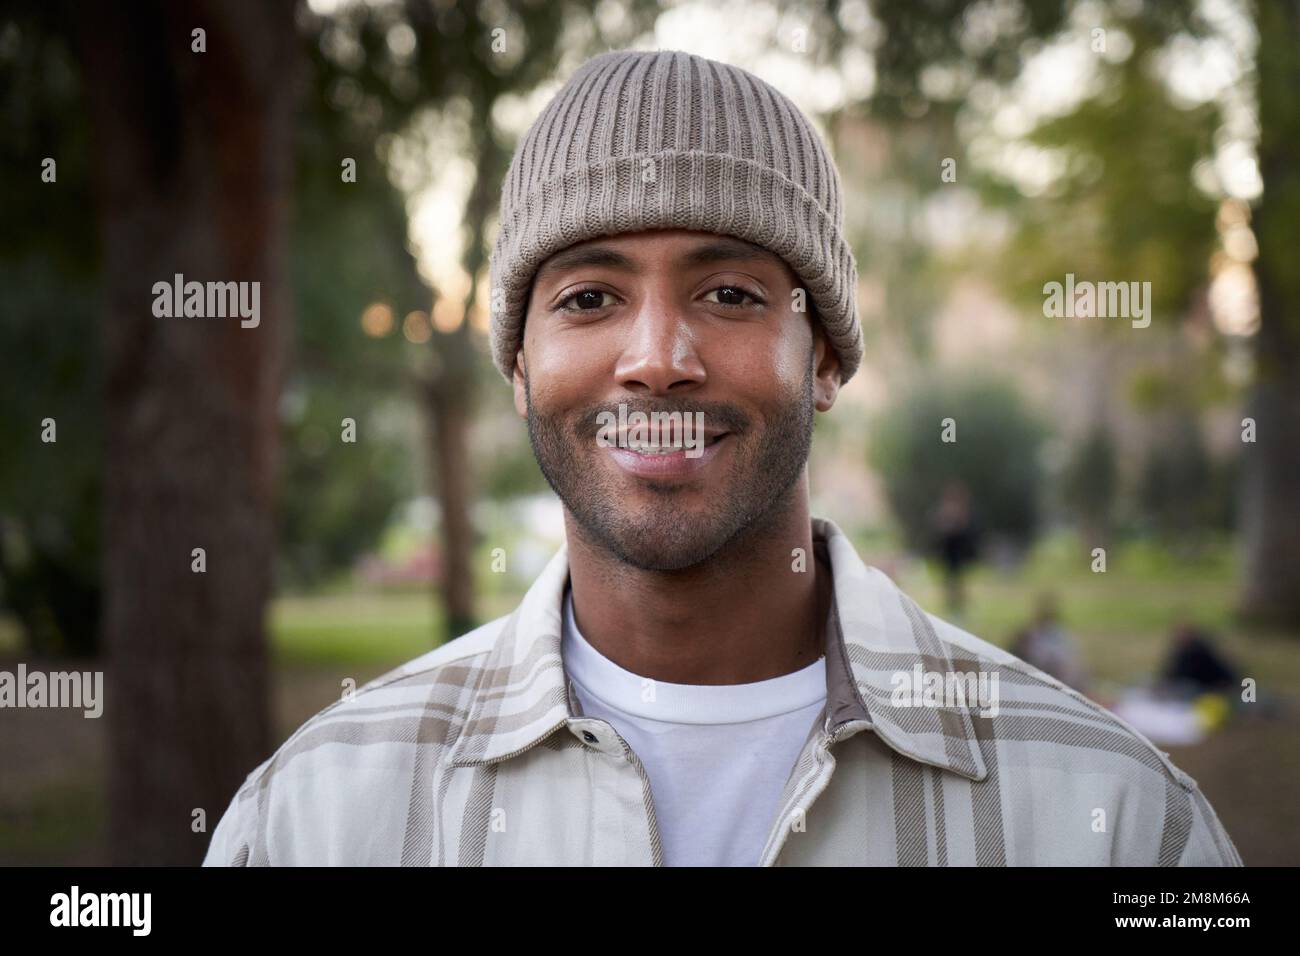 Portrait of handsome smiling young African man with knit hat looking camera positive expression Stock Photo